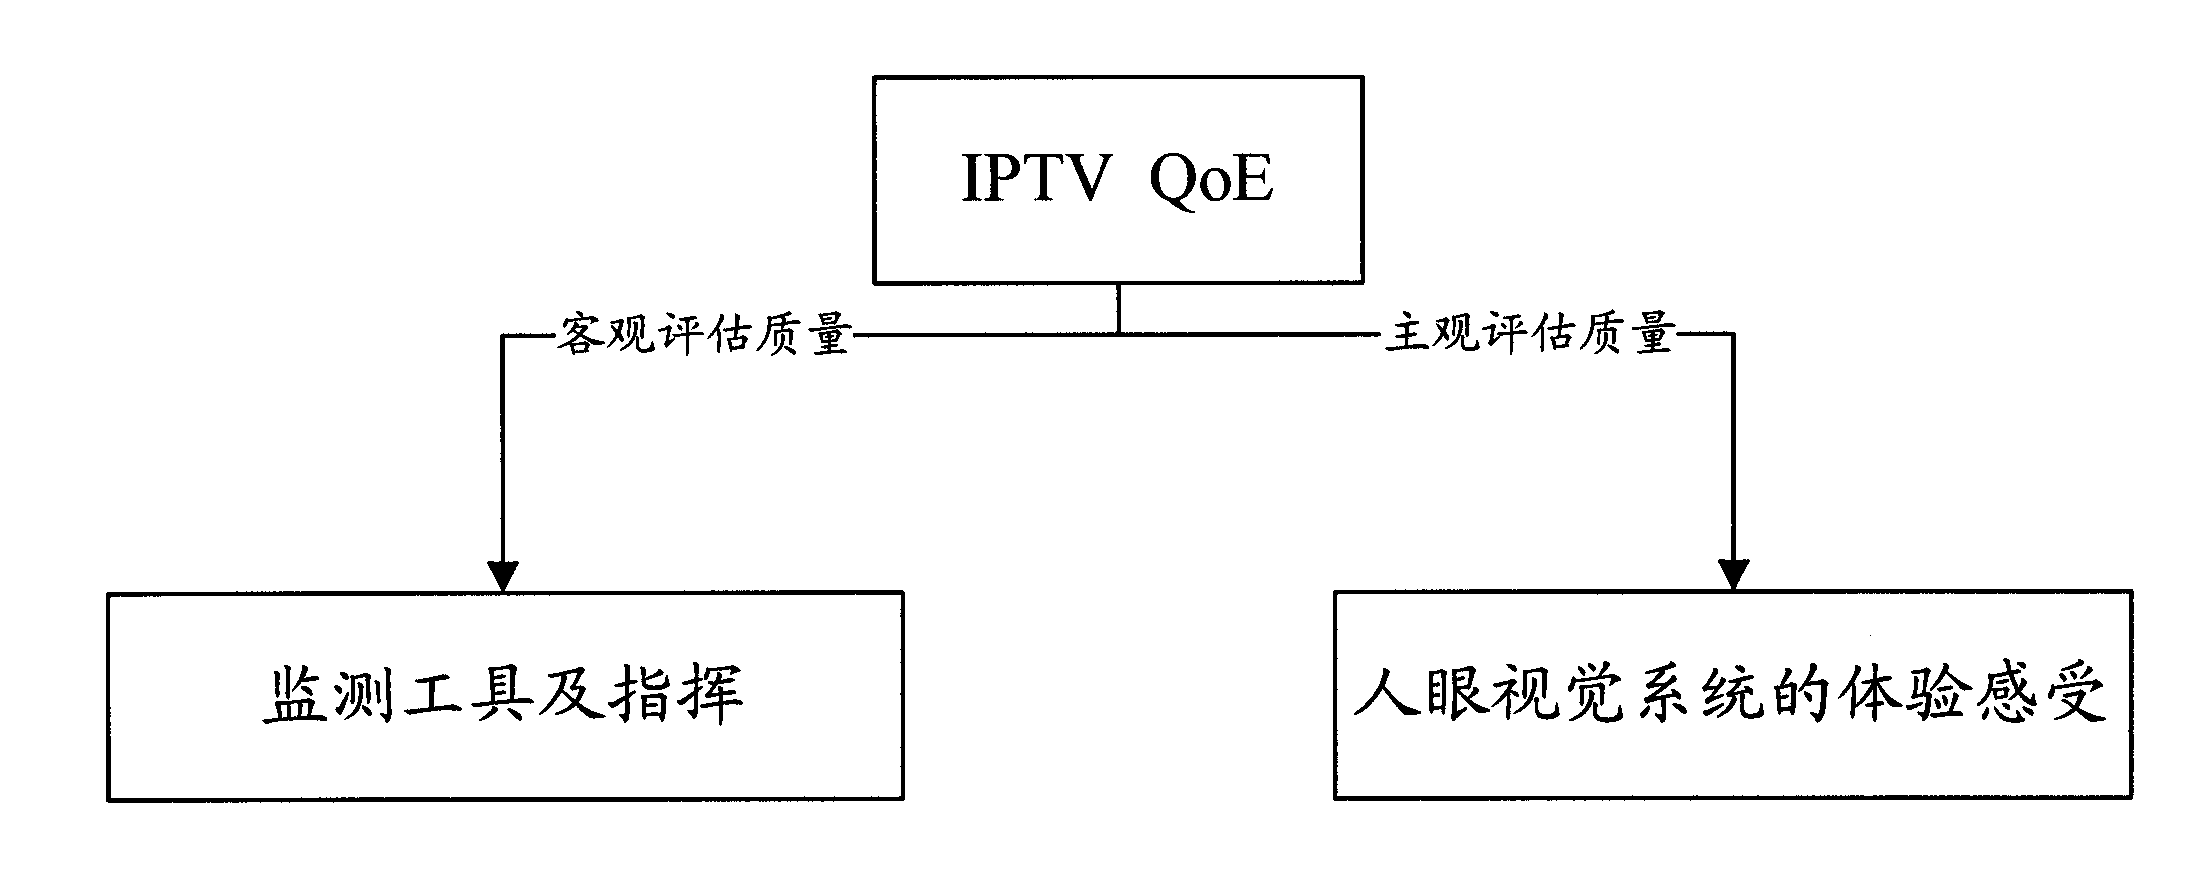 Quality assurance (QA) system and method of internet protocol television (IPTV) services